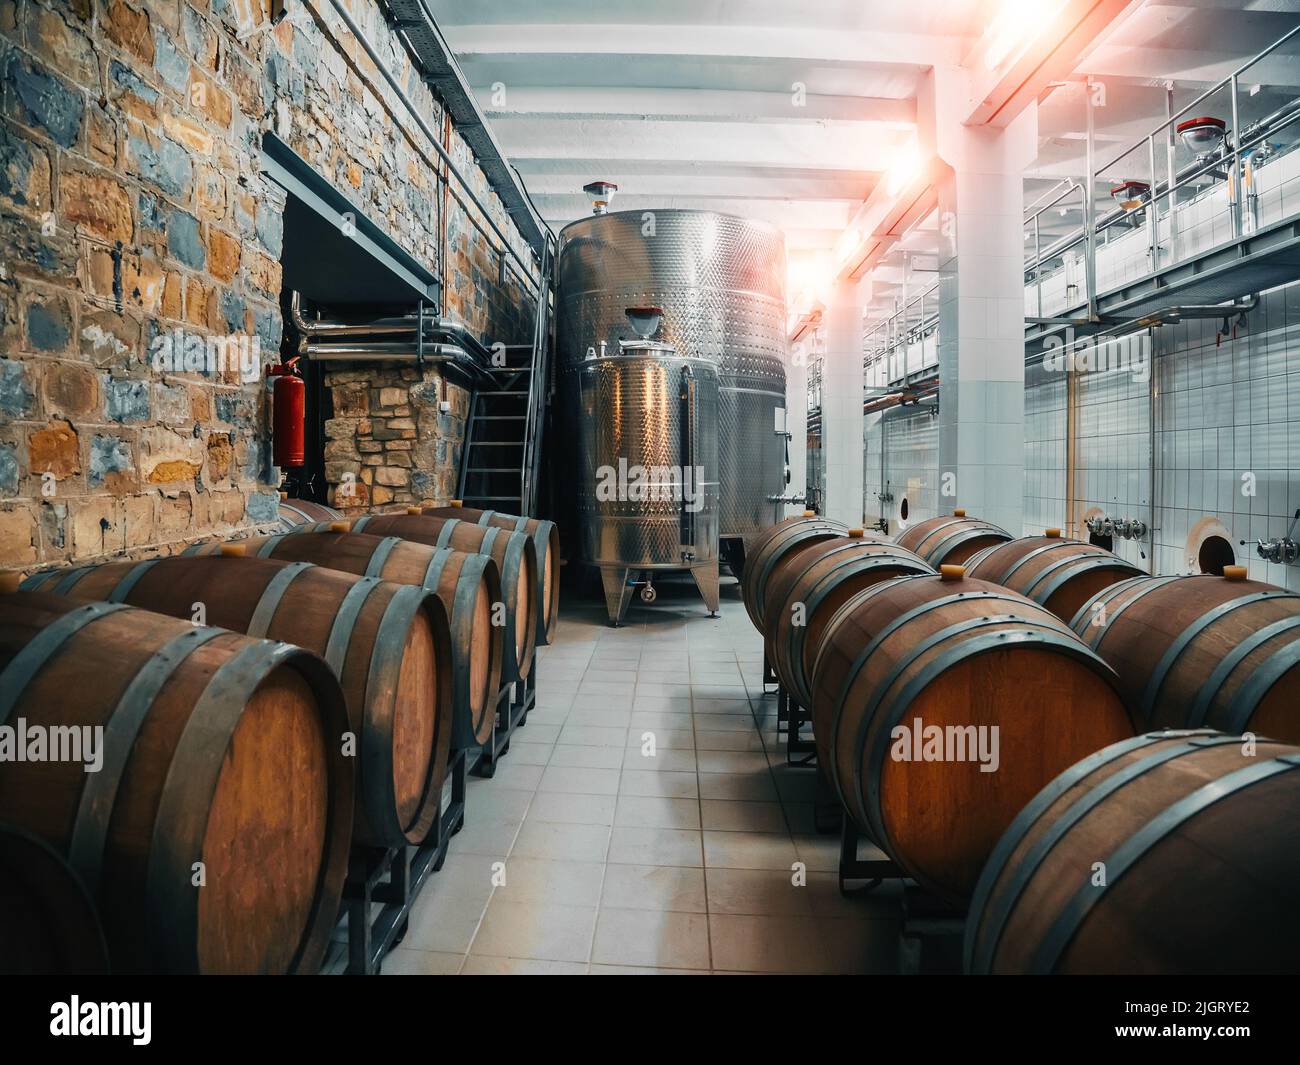 Winery factory with steel tanks for fermenting and wooden barrels for aging process, winemaking concept, food industry. Stock Photo